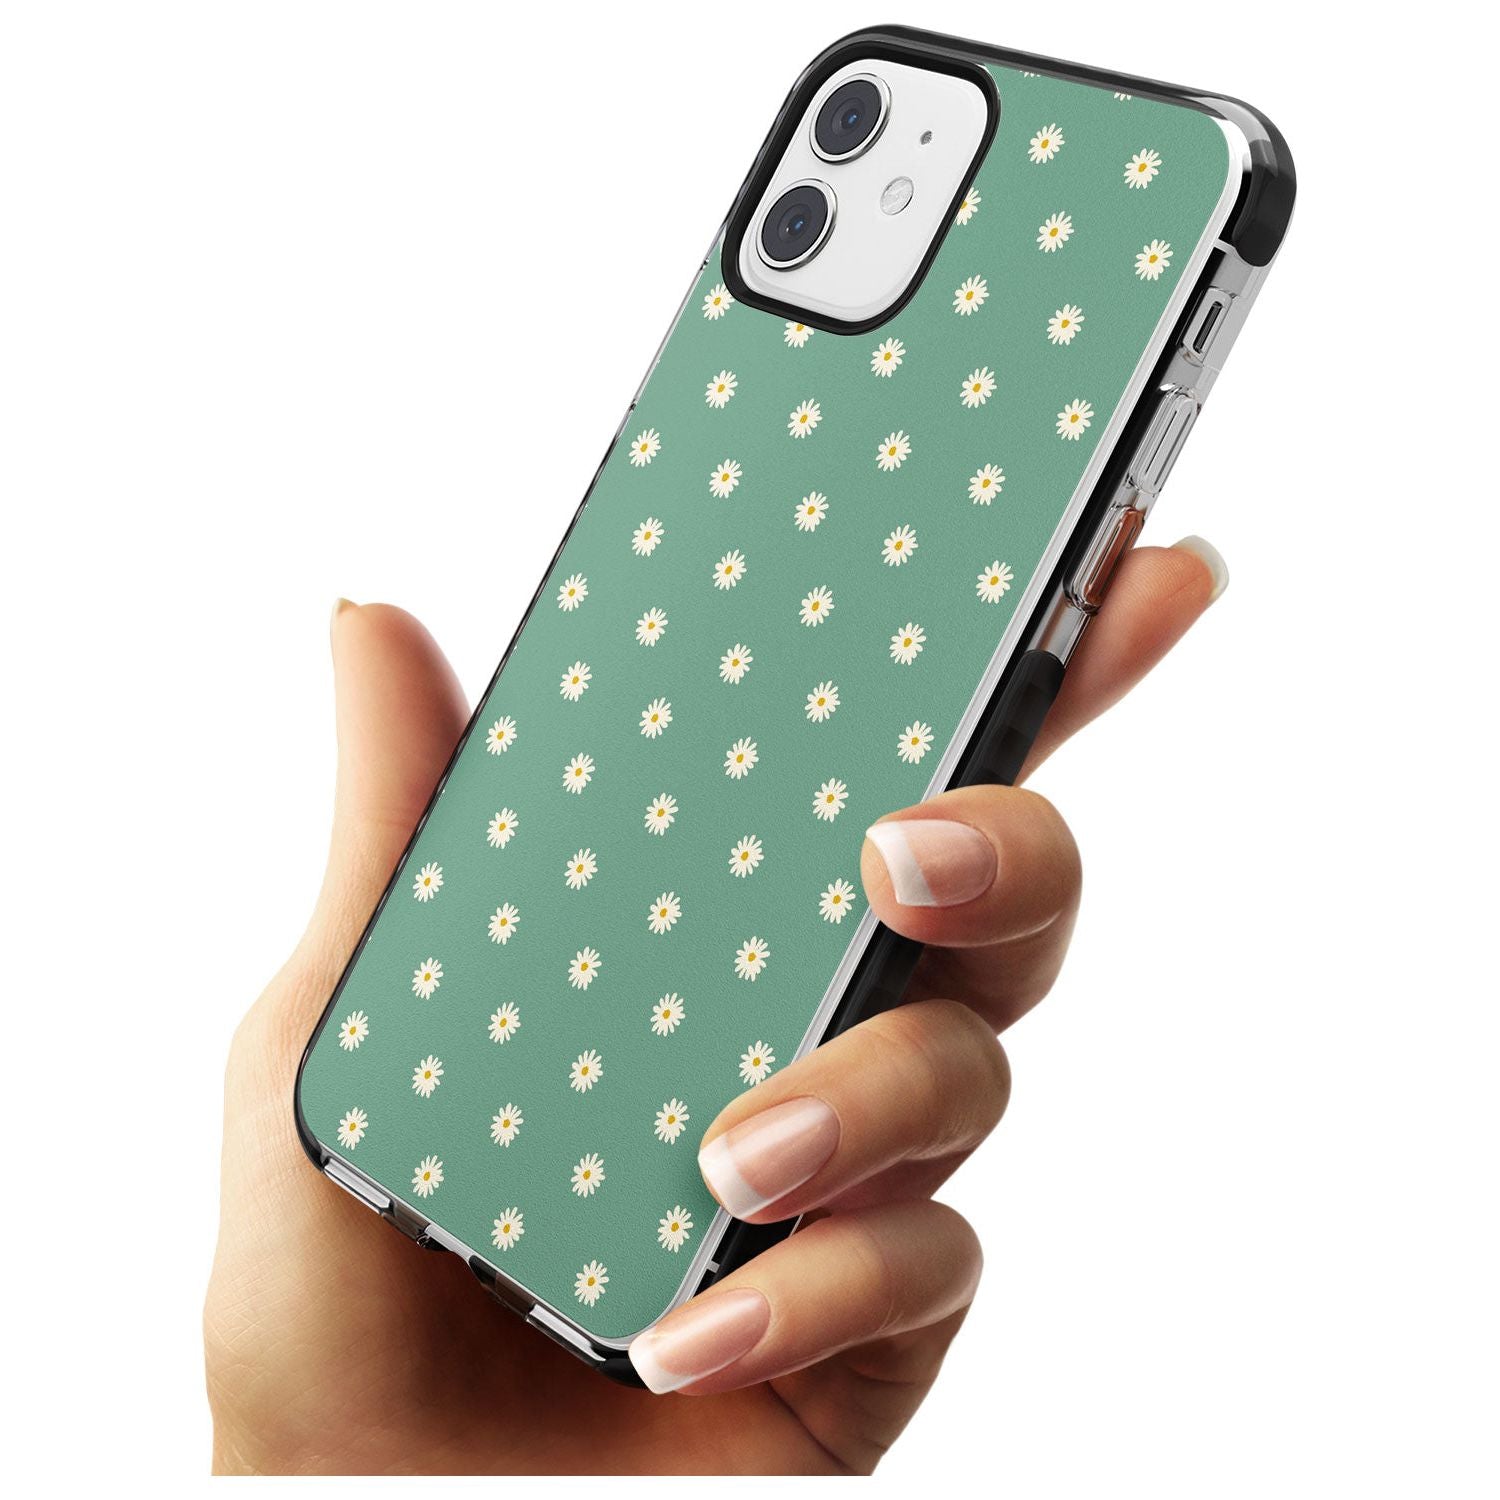 Daisy Pattern - Teal Cute Floral Daisy Design Pink Fade Impact Phone Case for iPhone 11 Pro Max